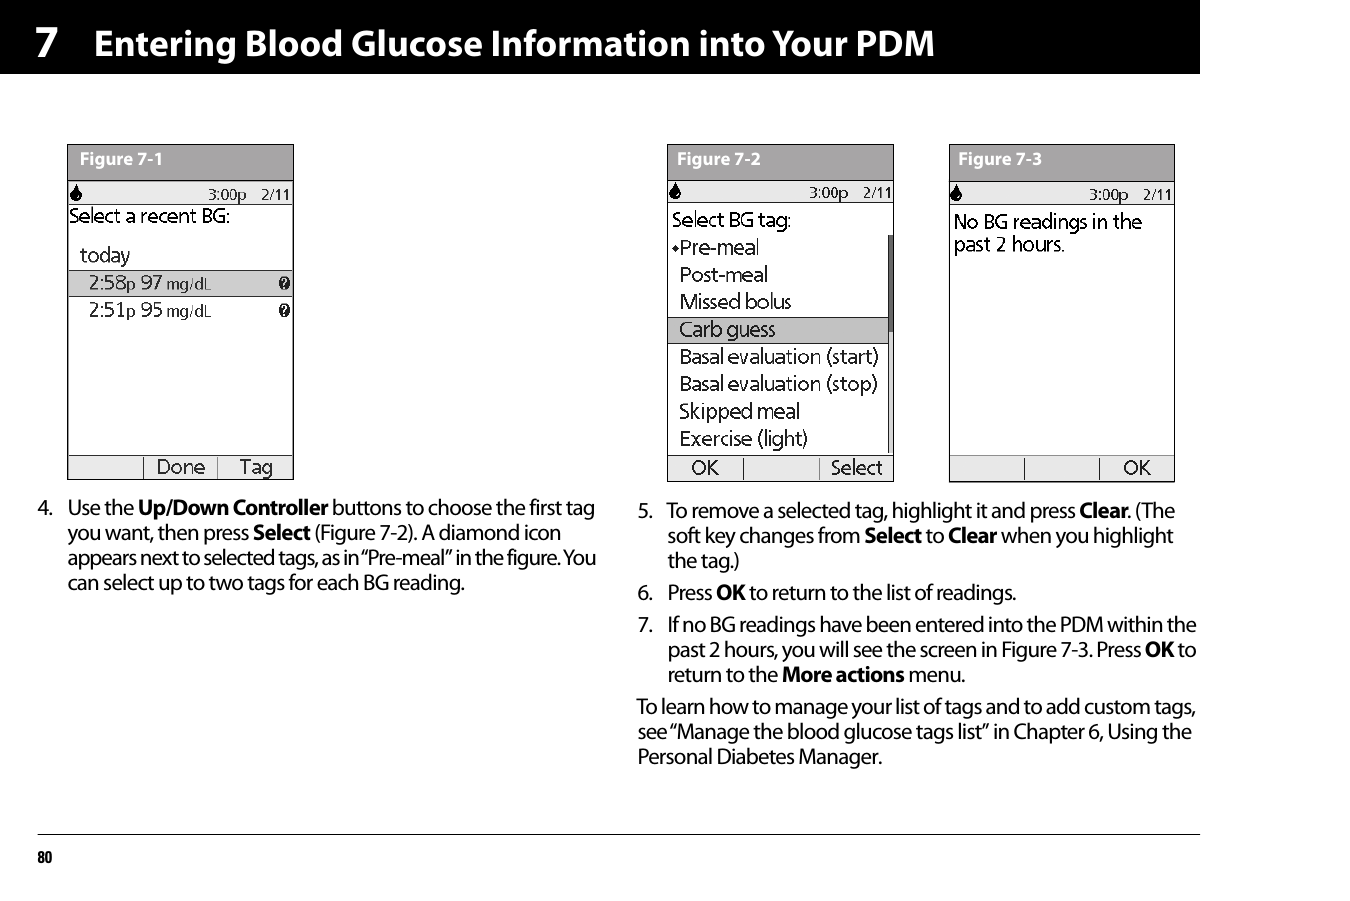 Entering Blood Glucose Information into Your PDM8074. Use the Up/Down Controller buttons to choose the first tag you want, then press Select (Figure 7-2). A diamond icon appears next to selected tags, as in “Pre-meal” in the figure. You can select up to two tags for each BG reading.5. To remove a selected tag, highlight it and press Clear. (The soft key changes from Select to Clear when you highlight the tag.)6. Press OK to return to the list of readings.7. If no BG readings have been entered into the PDM within the past 2 hours, you will see the screen in Figure 7-3. Press OK to return to the More actions menu.To learn how to manage your list of tags and to add custom tags, see “Manage the blood glucose tags list” in Chapter 6, Using the Personal Diabetes Manager.Figure 7-1 Figure 7-2 Figure 7-3